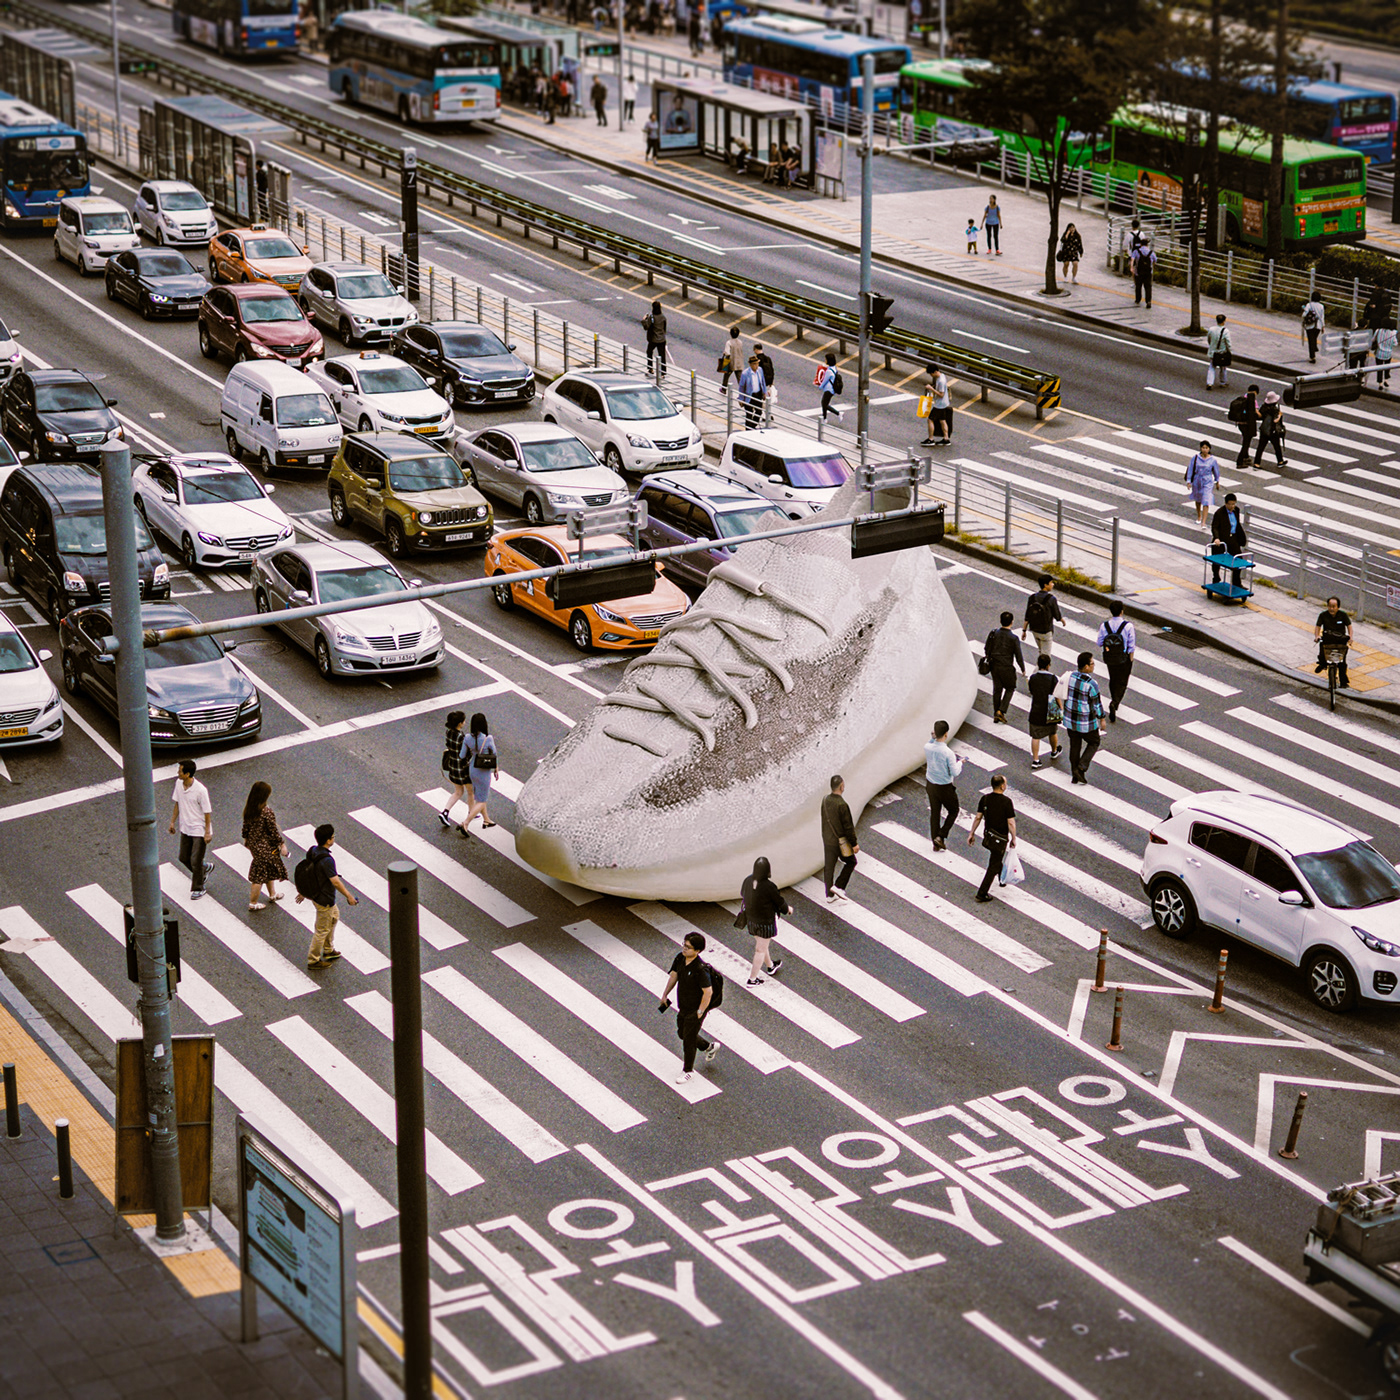 Giant sneaker photo composite. retouching and image manipulation done with photoshop